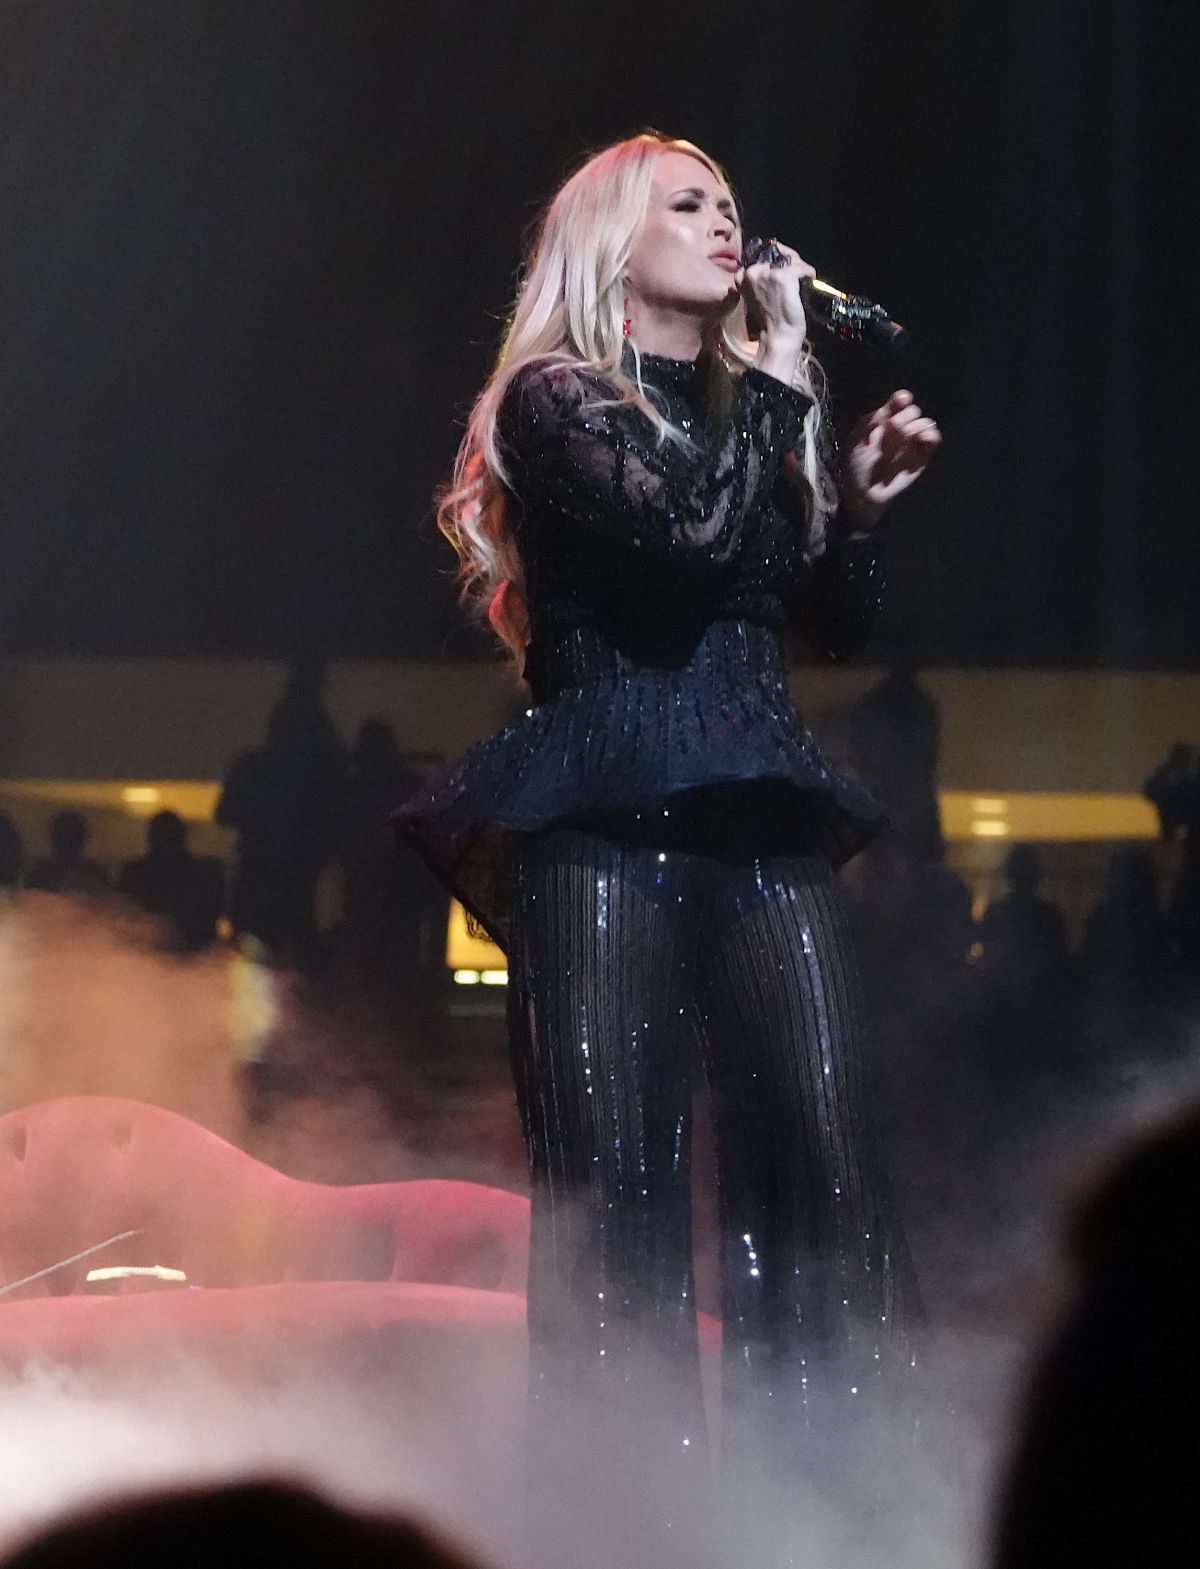 carrie-underwood-performs-at-mgm-grand-garden-arena-in-las-vegas-05-11-2019-5.jpg